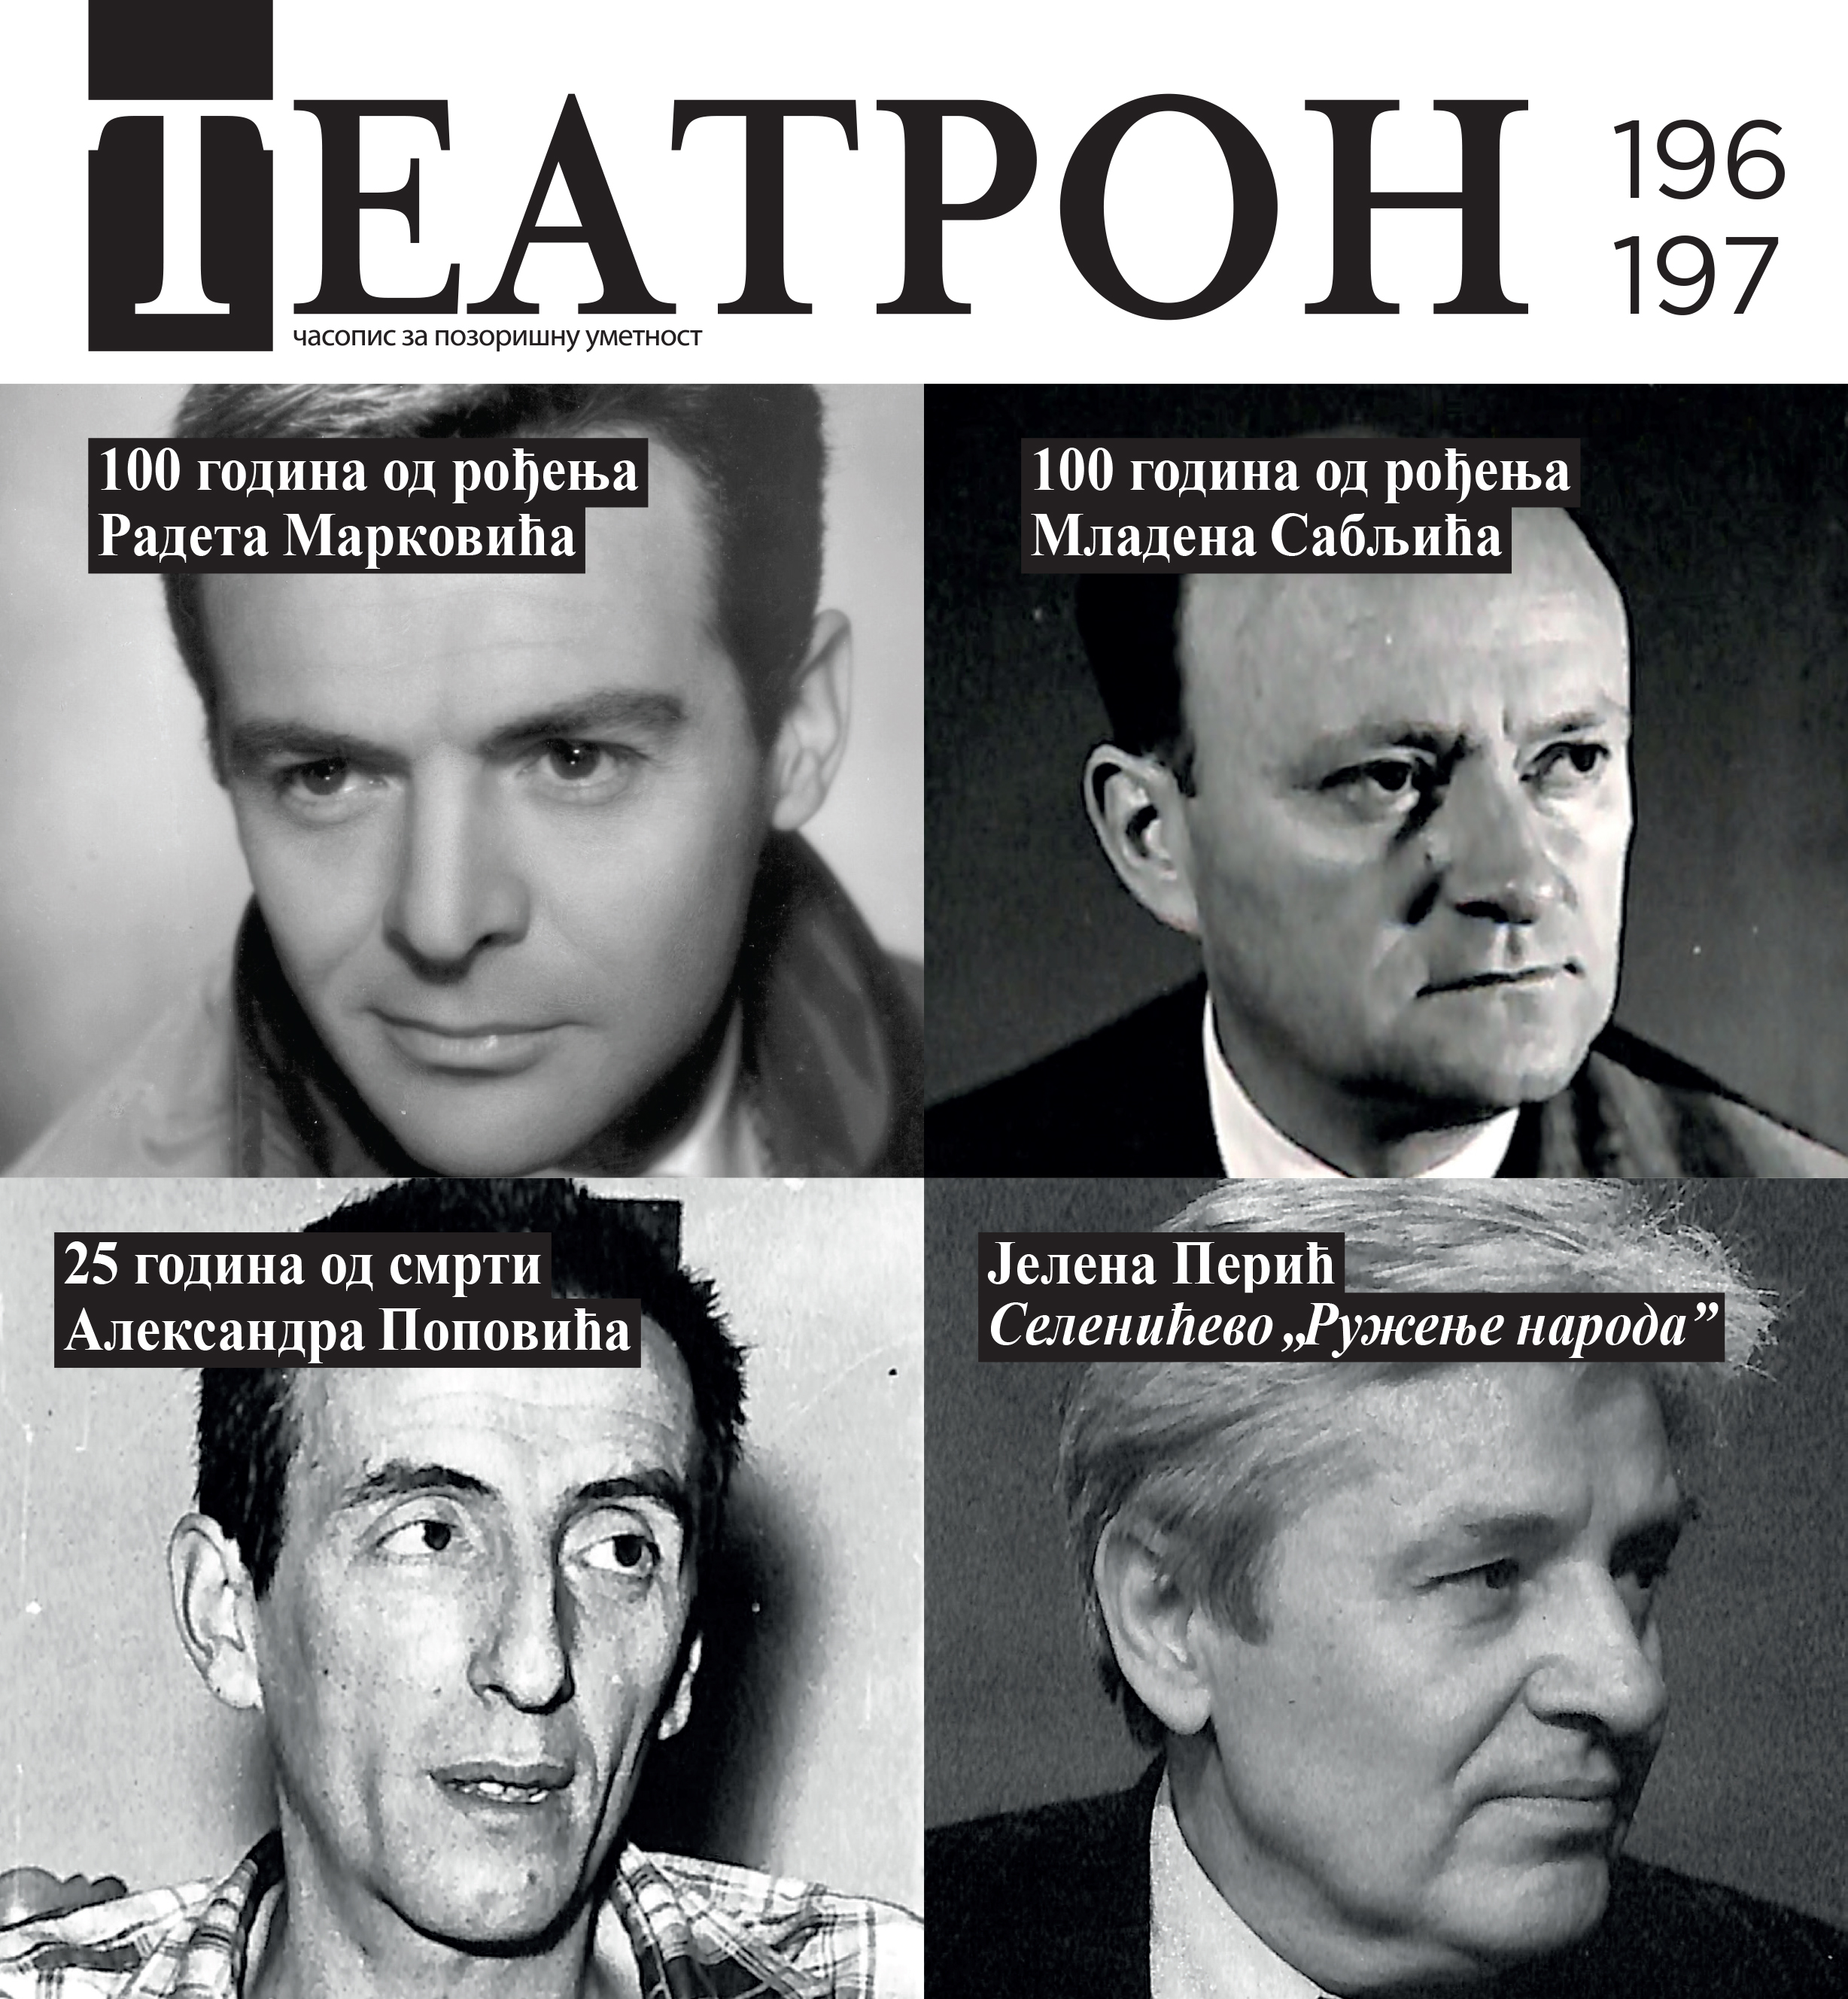 Selenić's Mockery of the people Cover Image